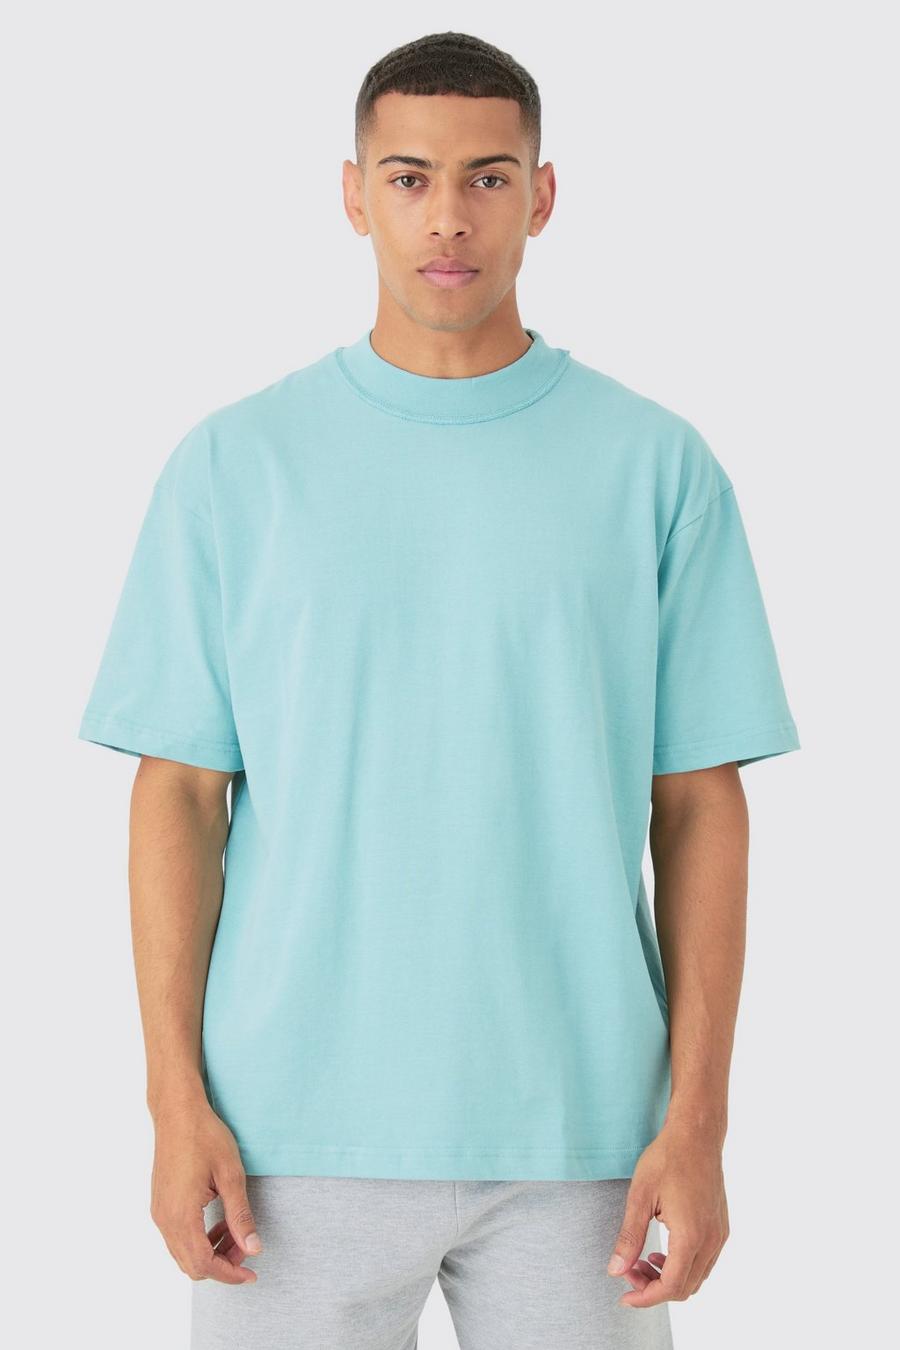 Dusty blue Oversized Heavy Layed On Neck Carded T-shirt